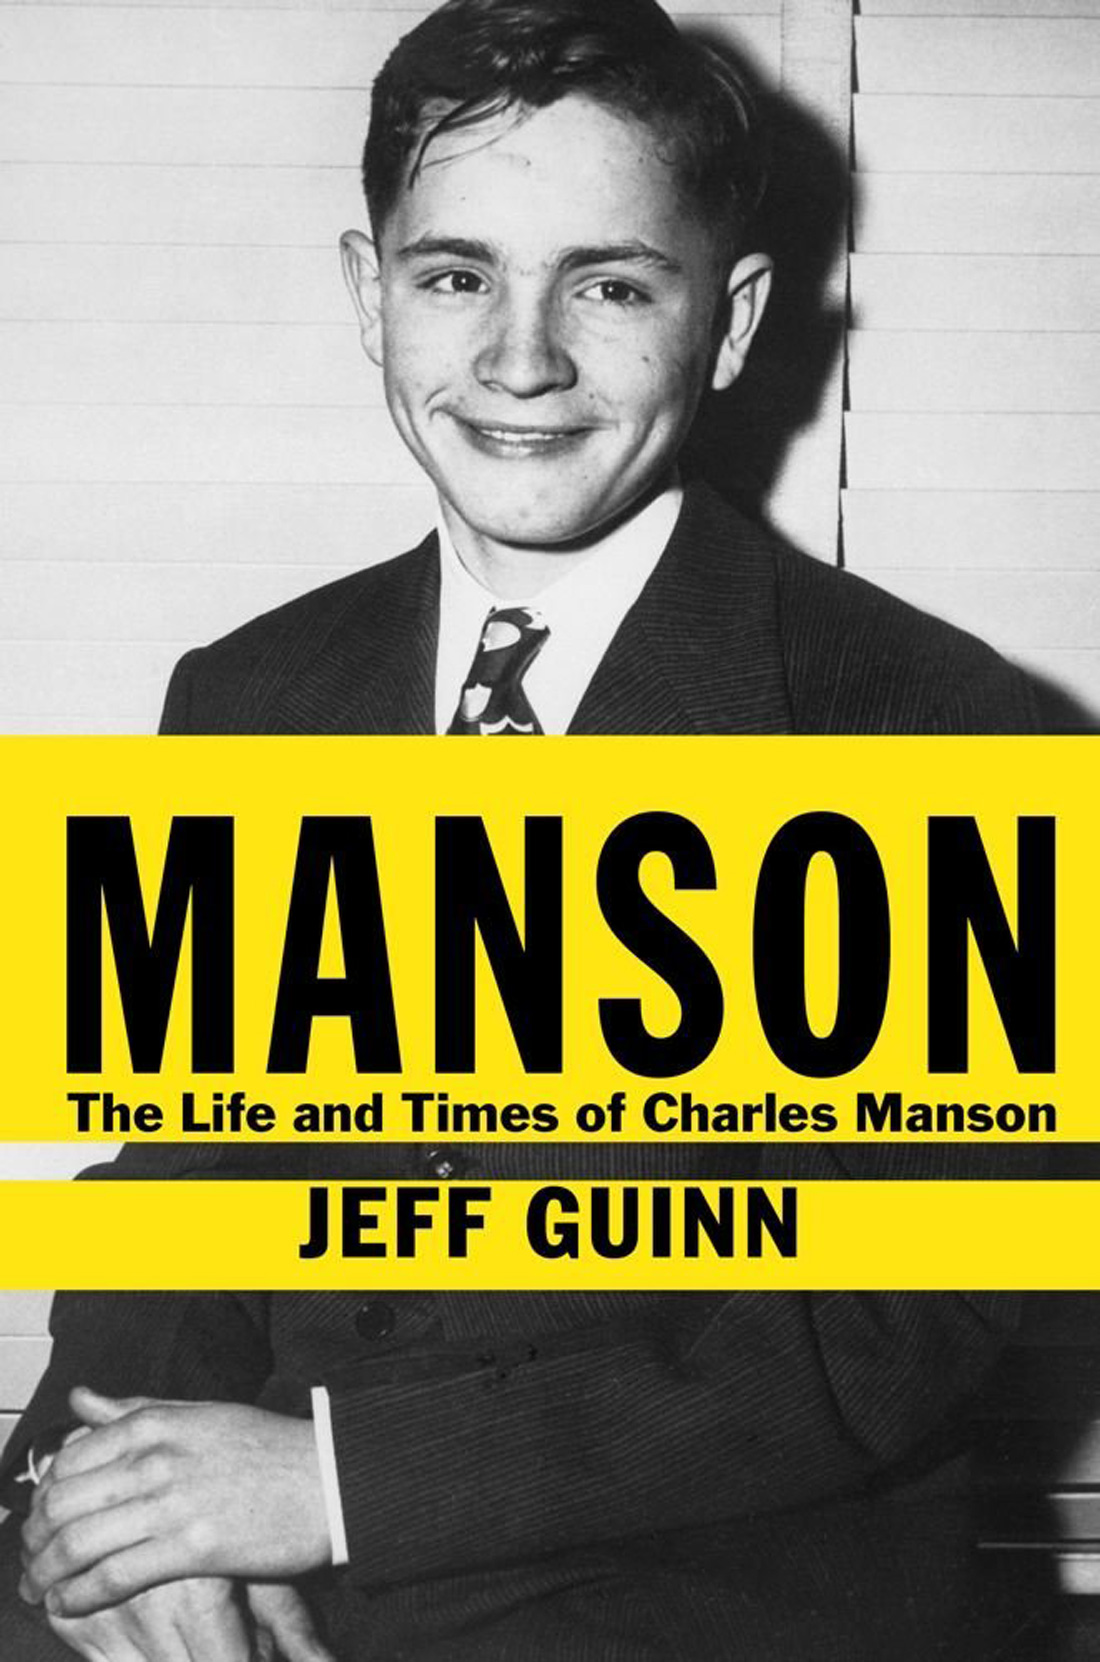 Manson: The Life and Times of Charles Manson by Jeff Guinn. Simon & Schuster, 497 pps., $27.50